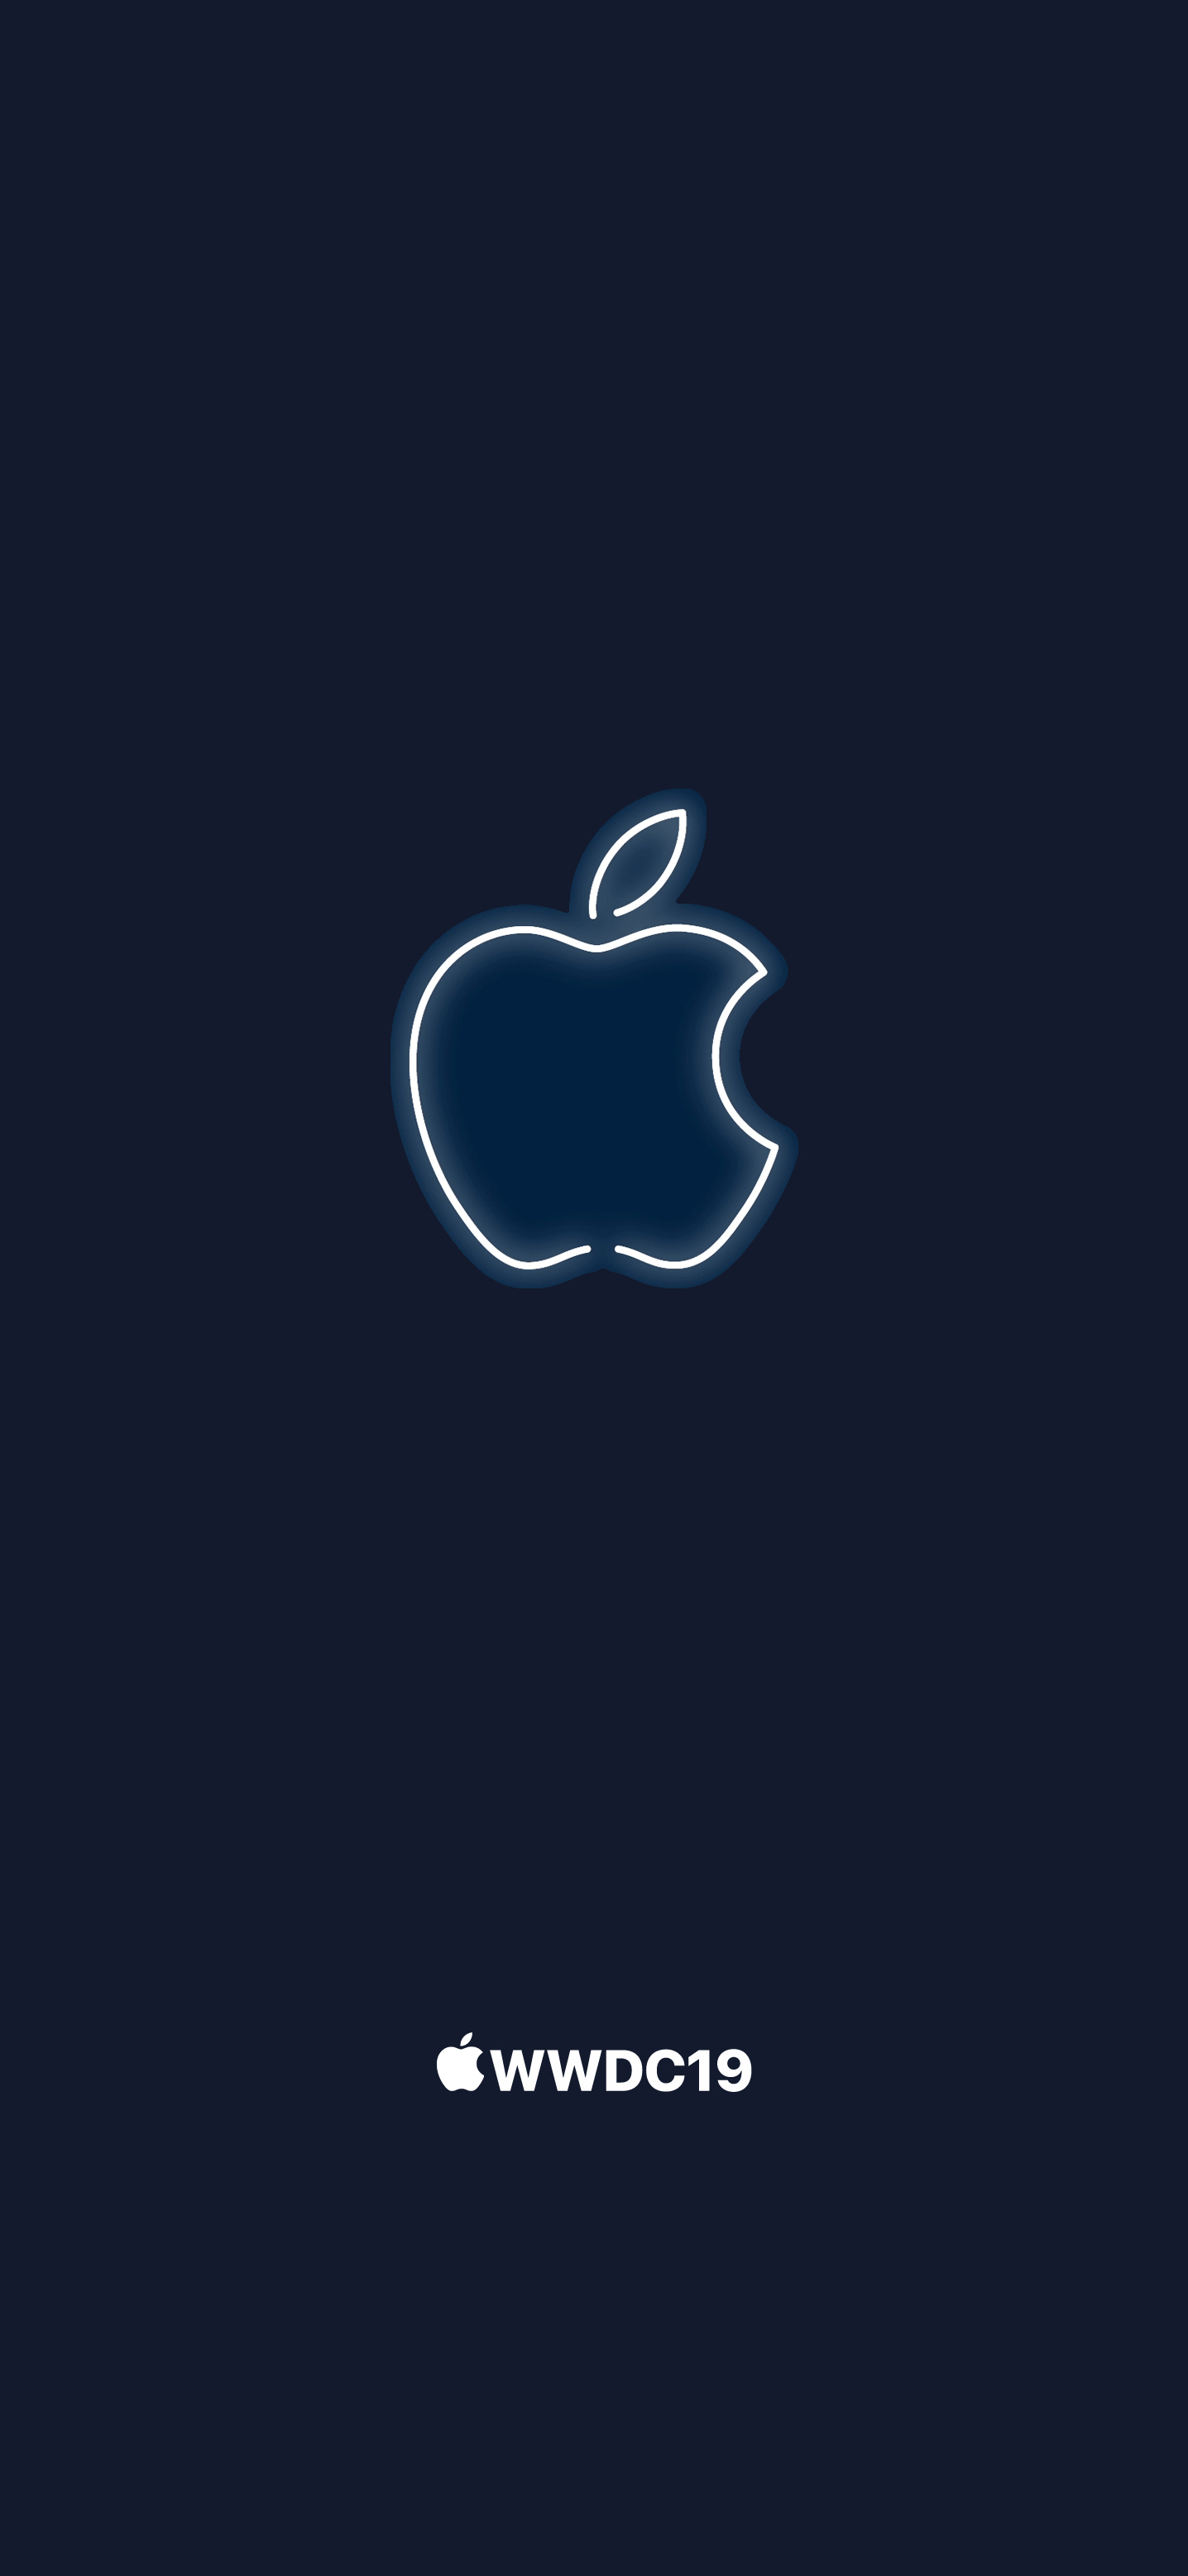 WWDC 2019 Wallpaper | Apple - Wallpapers Central